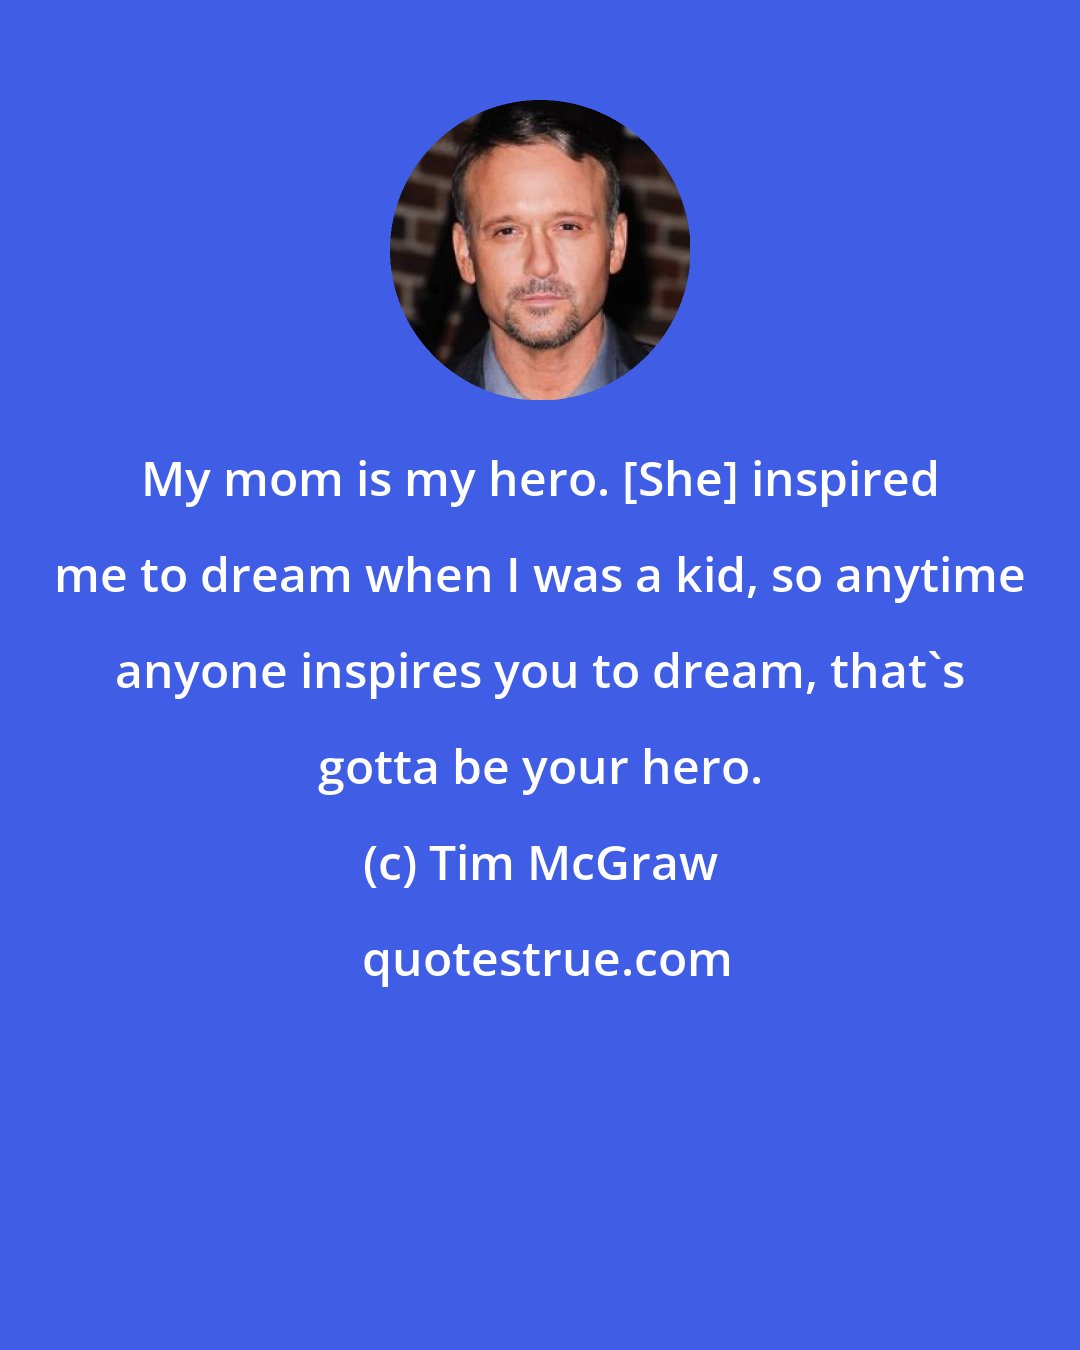 Tim McGraw: My mom is my hero. [She] inspired me to dream when I was a kid, so anytime anyone inspires you to dream, that's gotta be your hero.